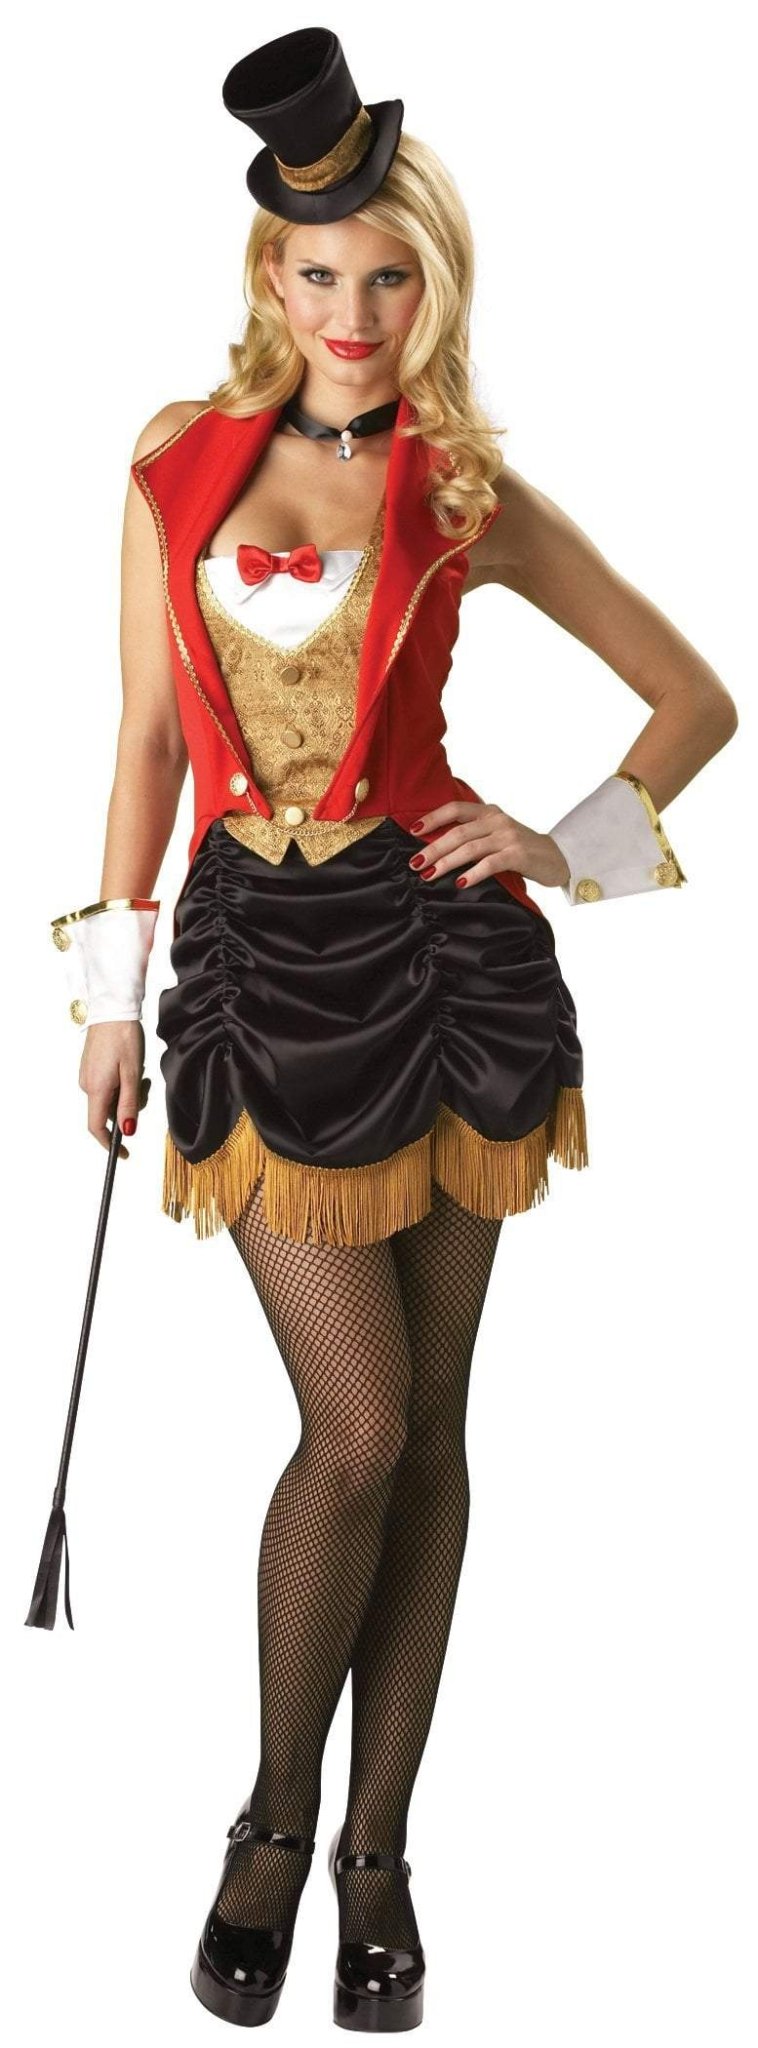 Deluxe Three Ring Hottie Ringmaster Costume - JJ's Party House